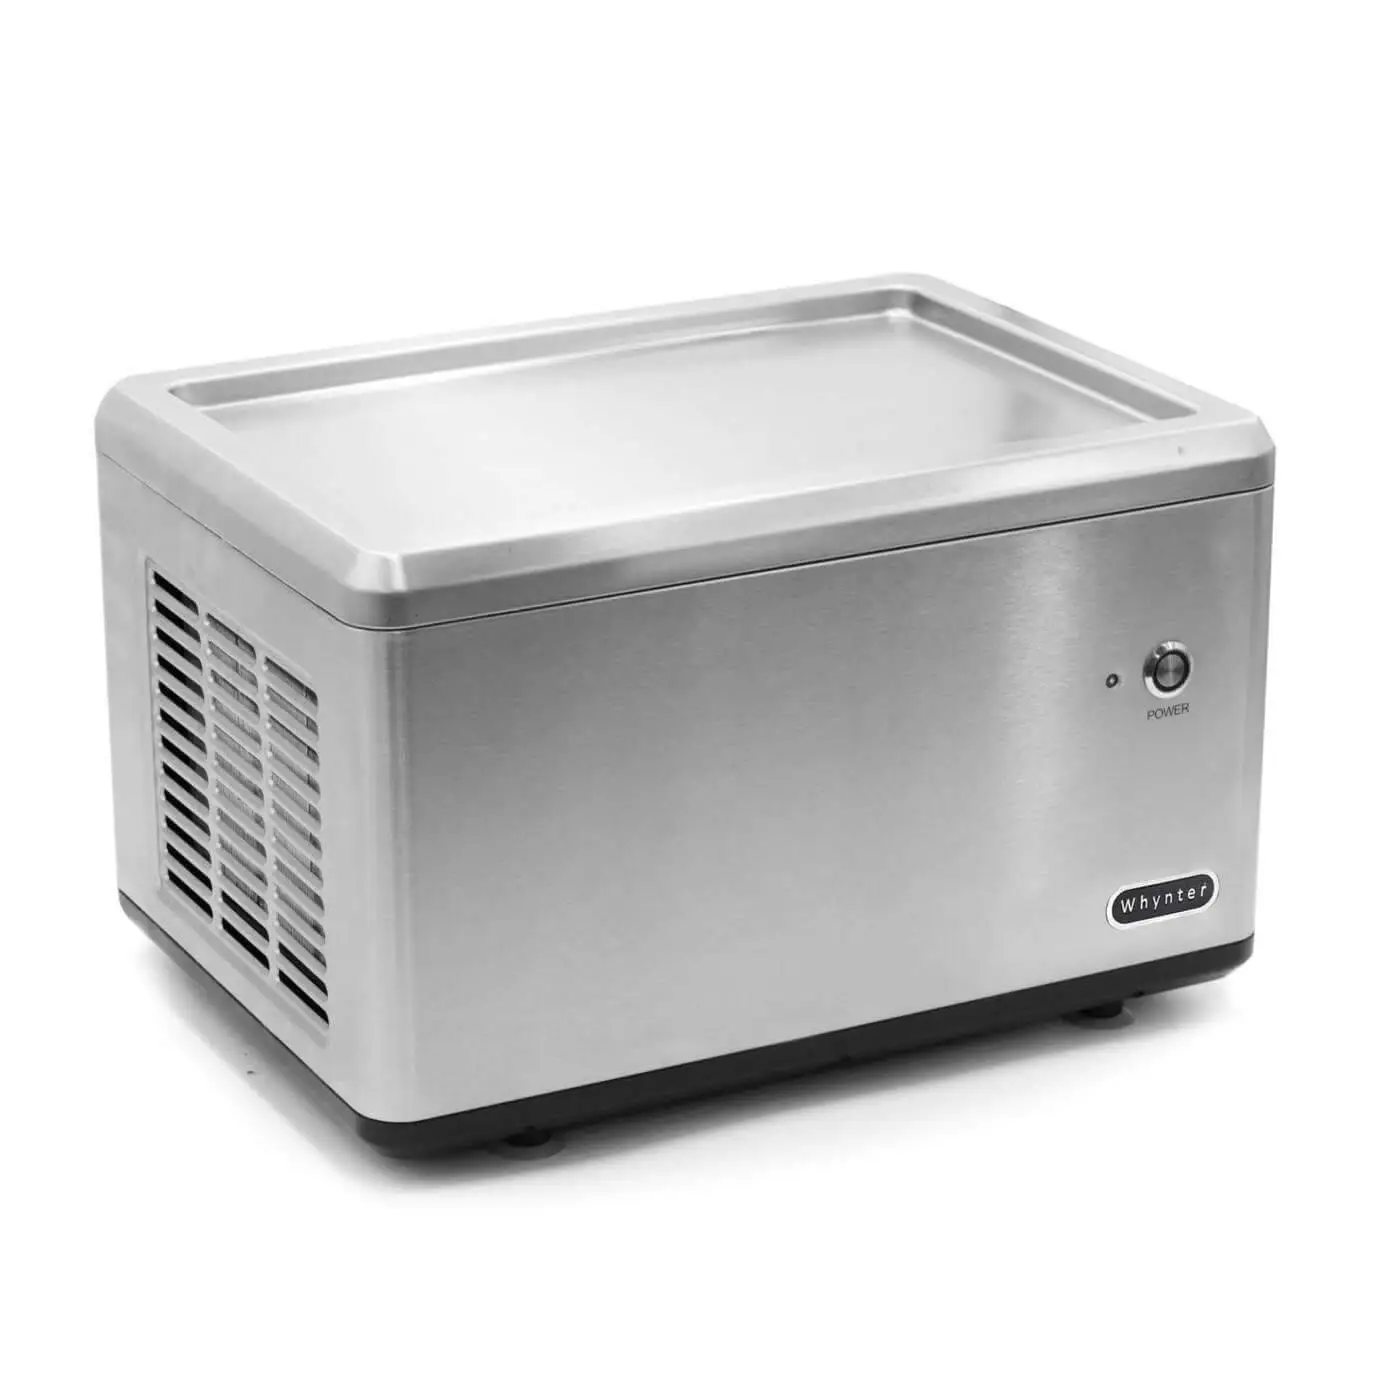 Whynter ICR-300SS 0.5-quart Stainless steel rolled ice cream maker